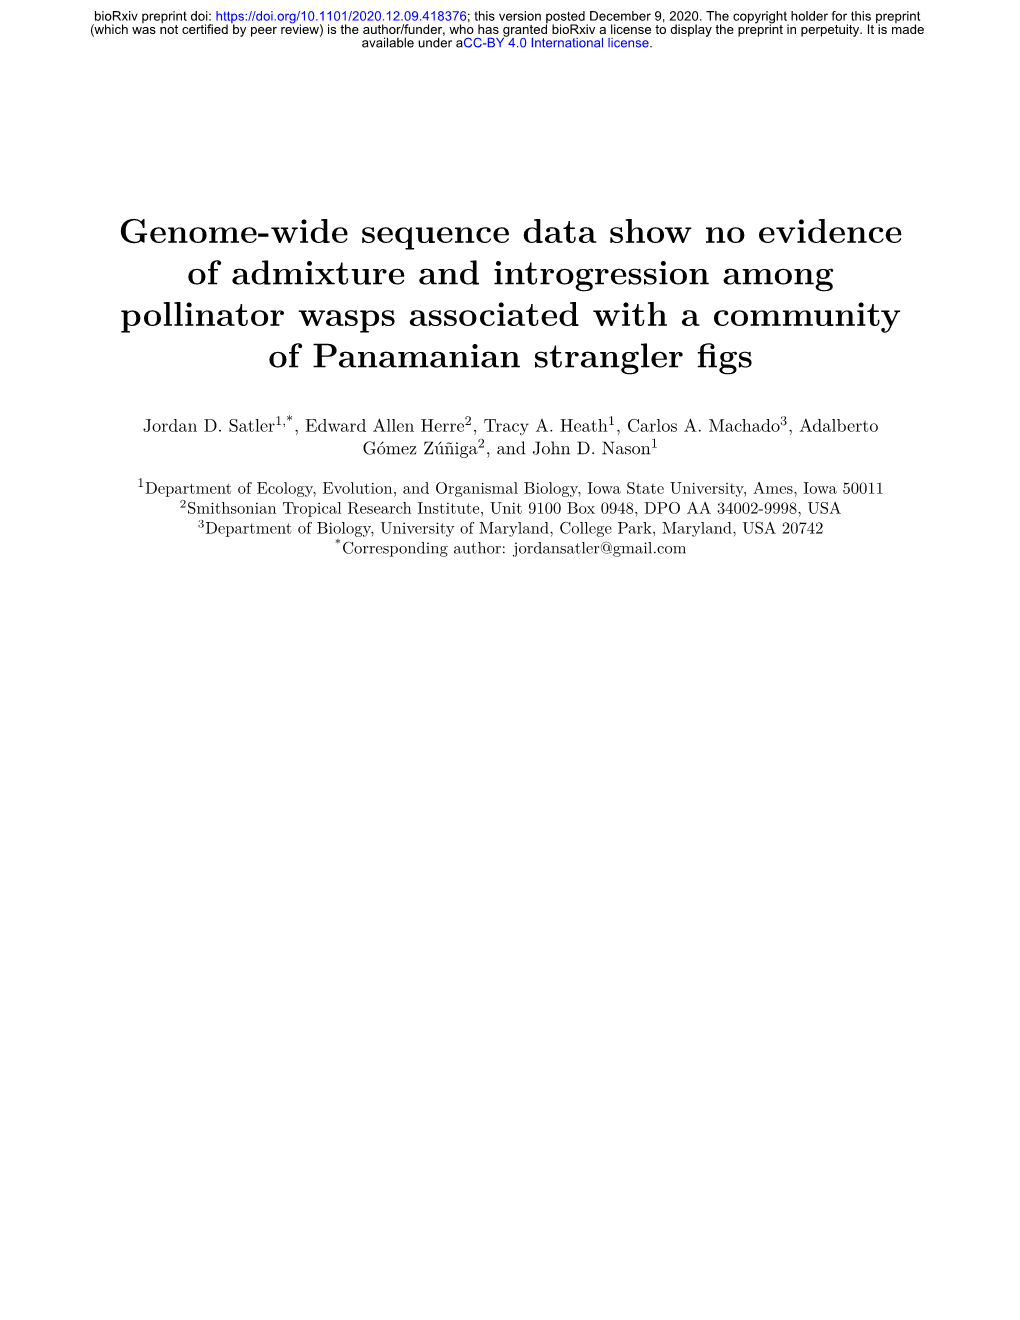 Genome-Wide Sequence Data Show No Evidence of Admixture and Introgression Among Pollinator Wasps Associated with a Community of Panamanian Strangler ﬁgs